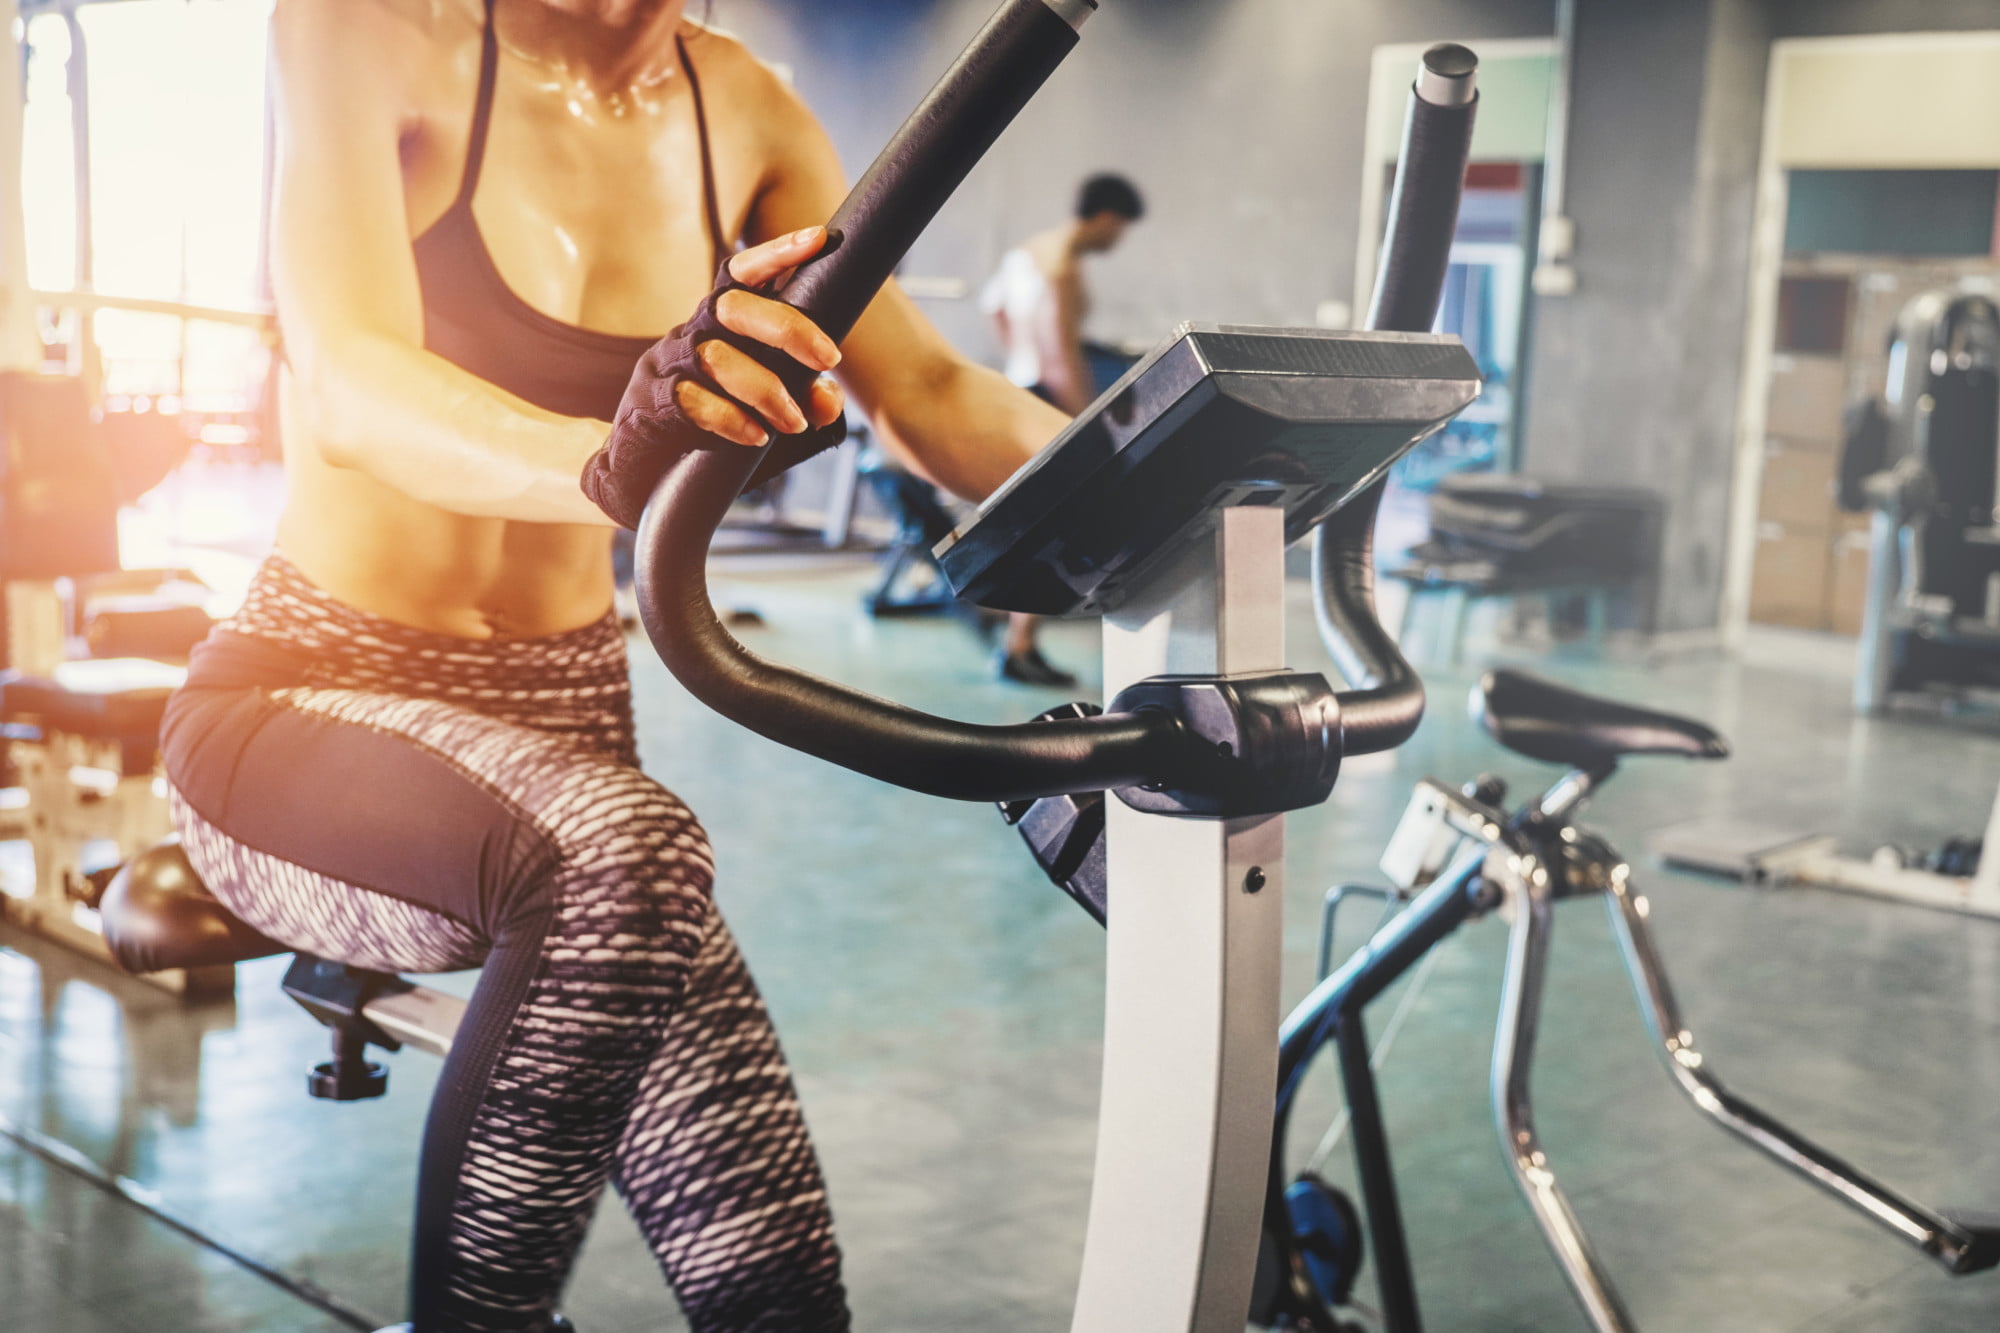 Are you thinking about buying an indoor bike for your home? Check out these incredible health benefits of cycling indoors.